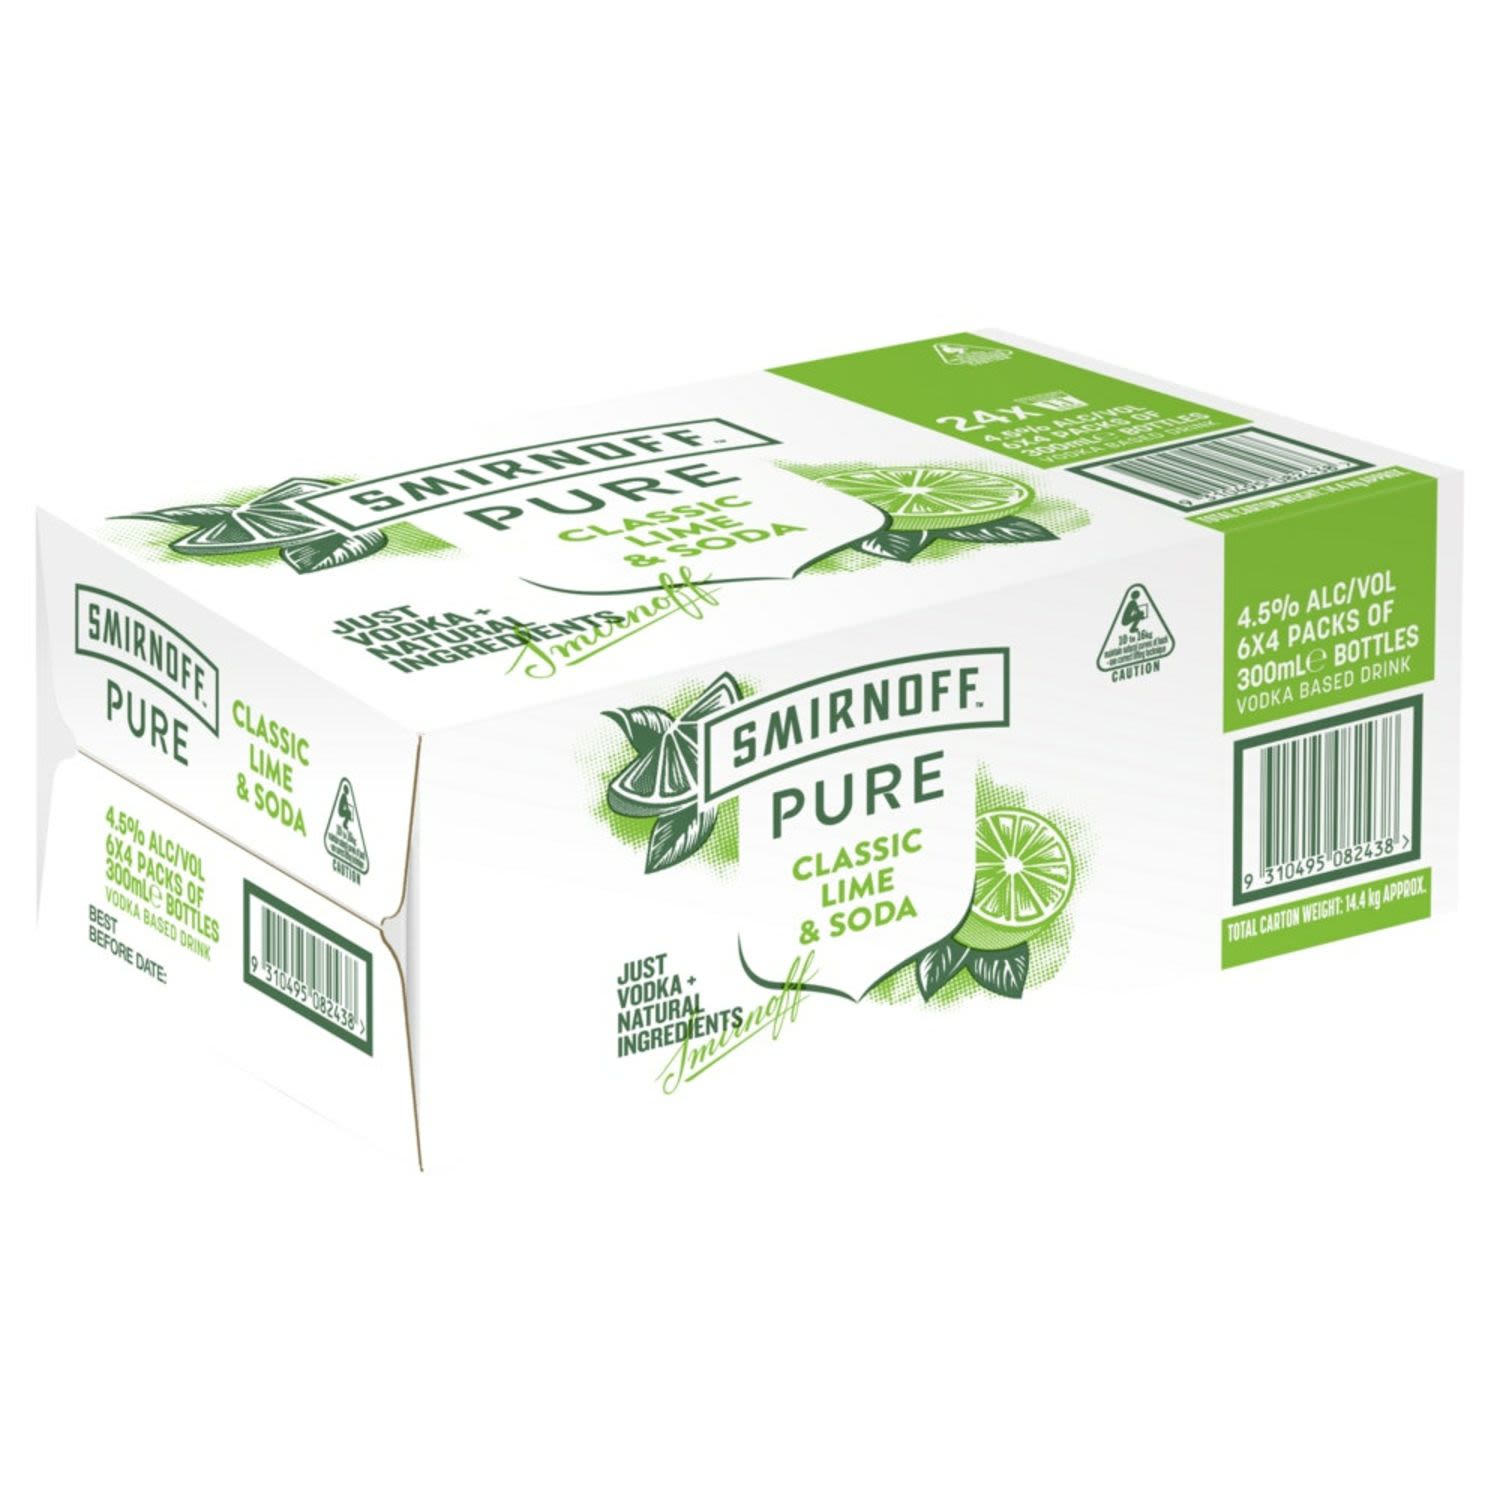 Smirnoff Pure Classic Lime and Soda Bottle 300mL 24 Pack